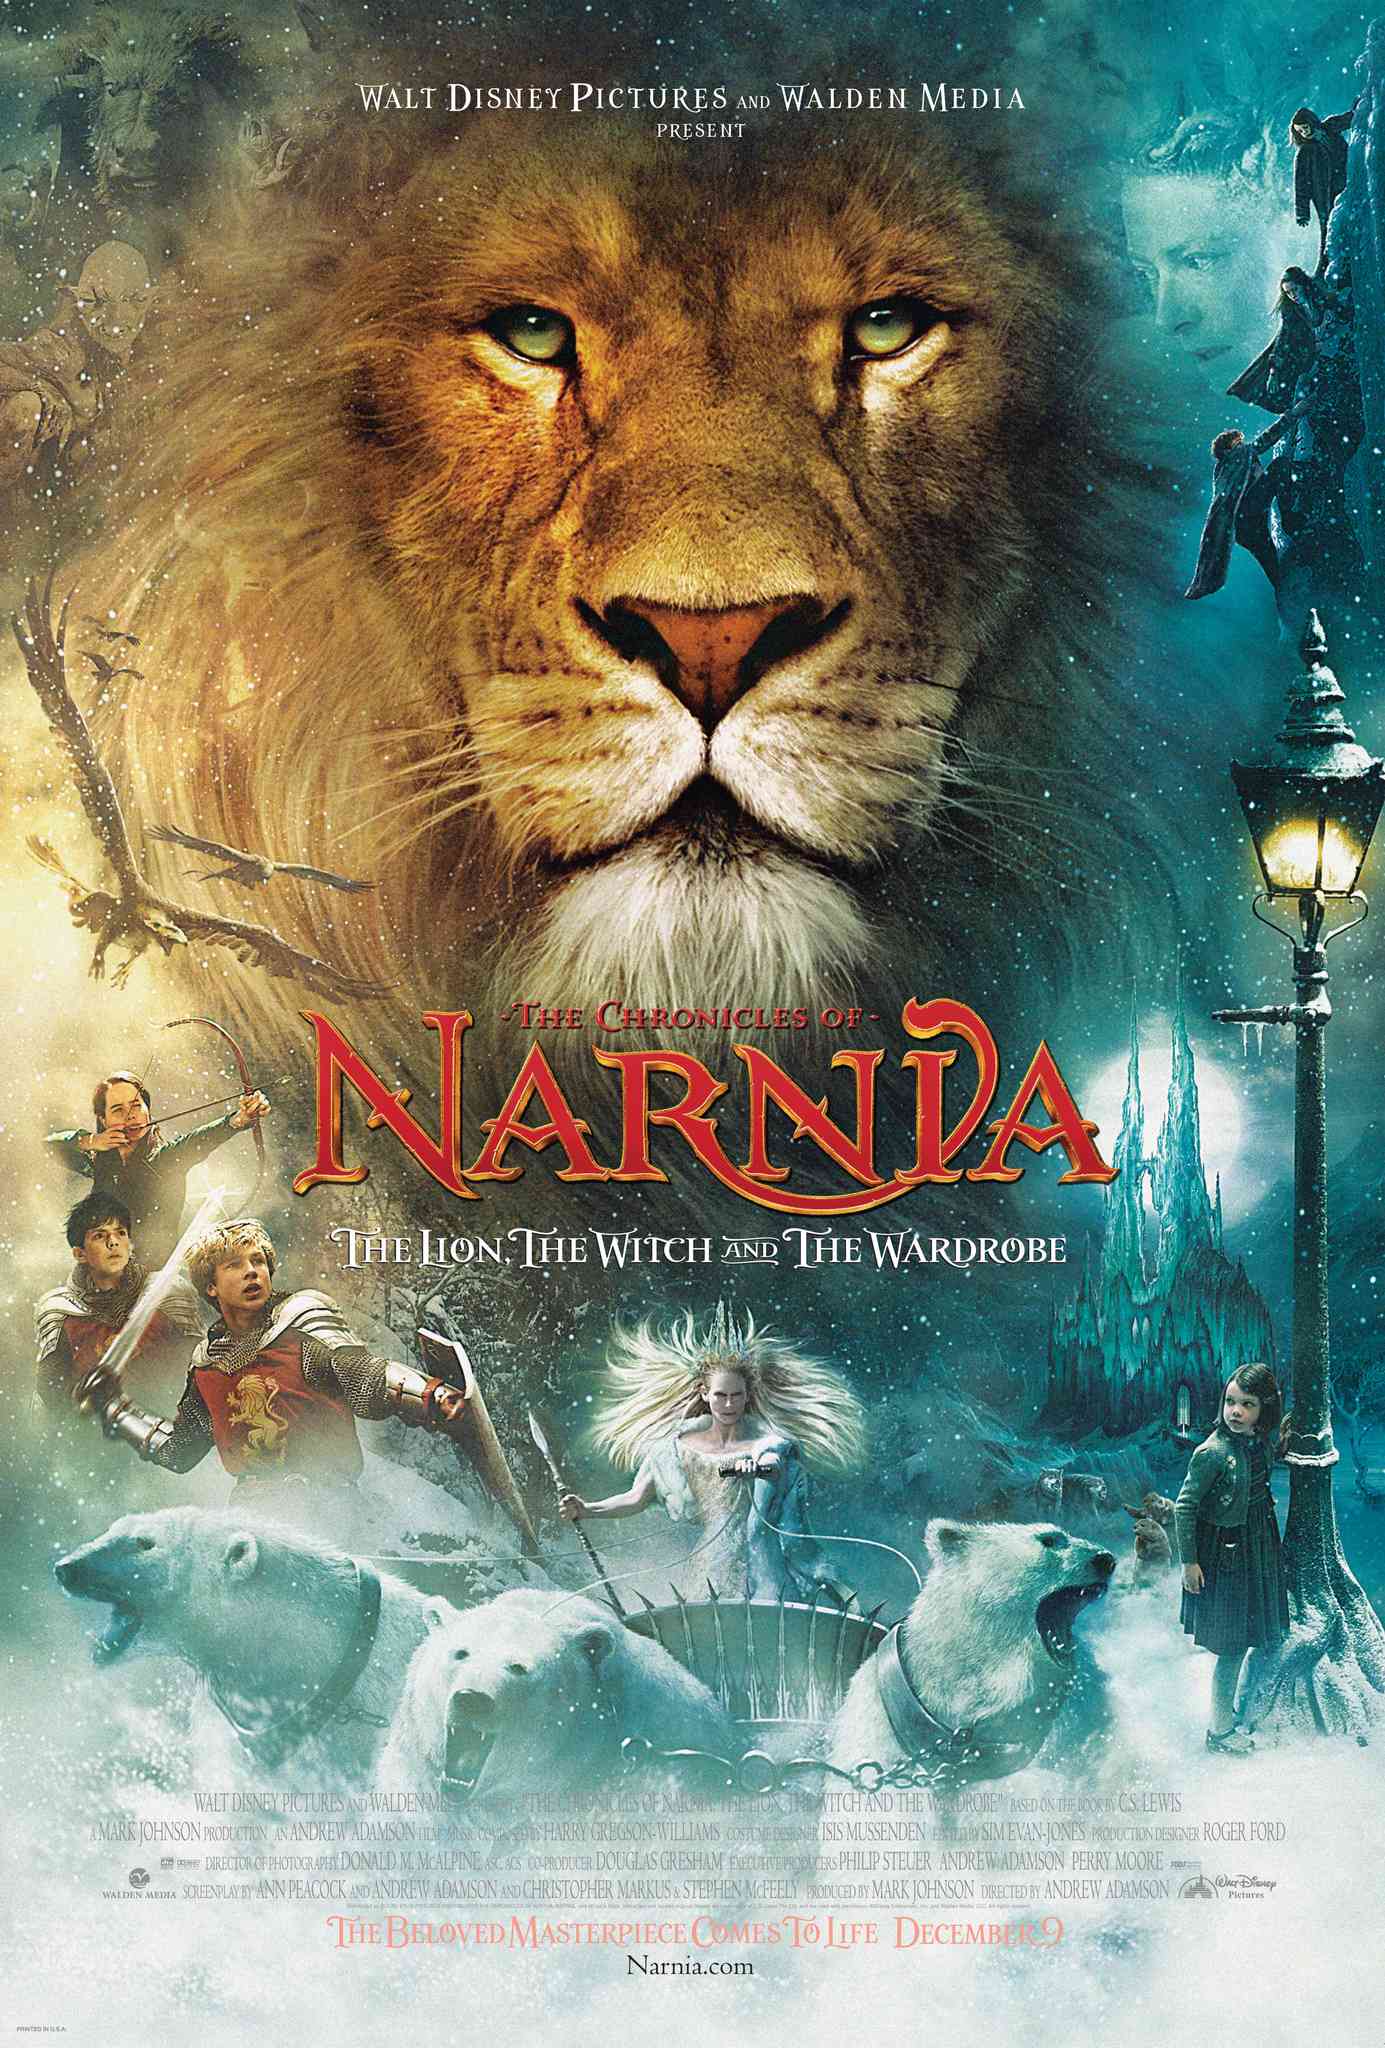 DOWNLOAD The Chronicles of Narnia: The Lion, The Witch and the Wardrobe (2005)